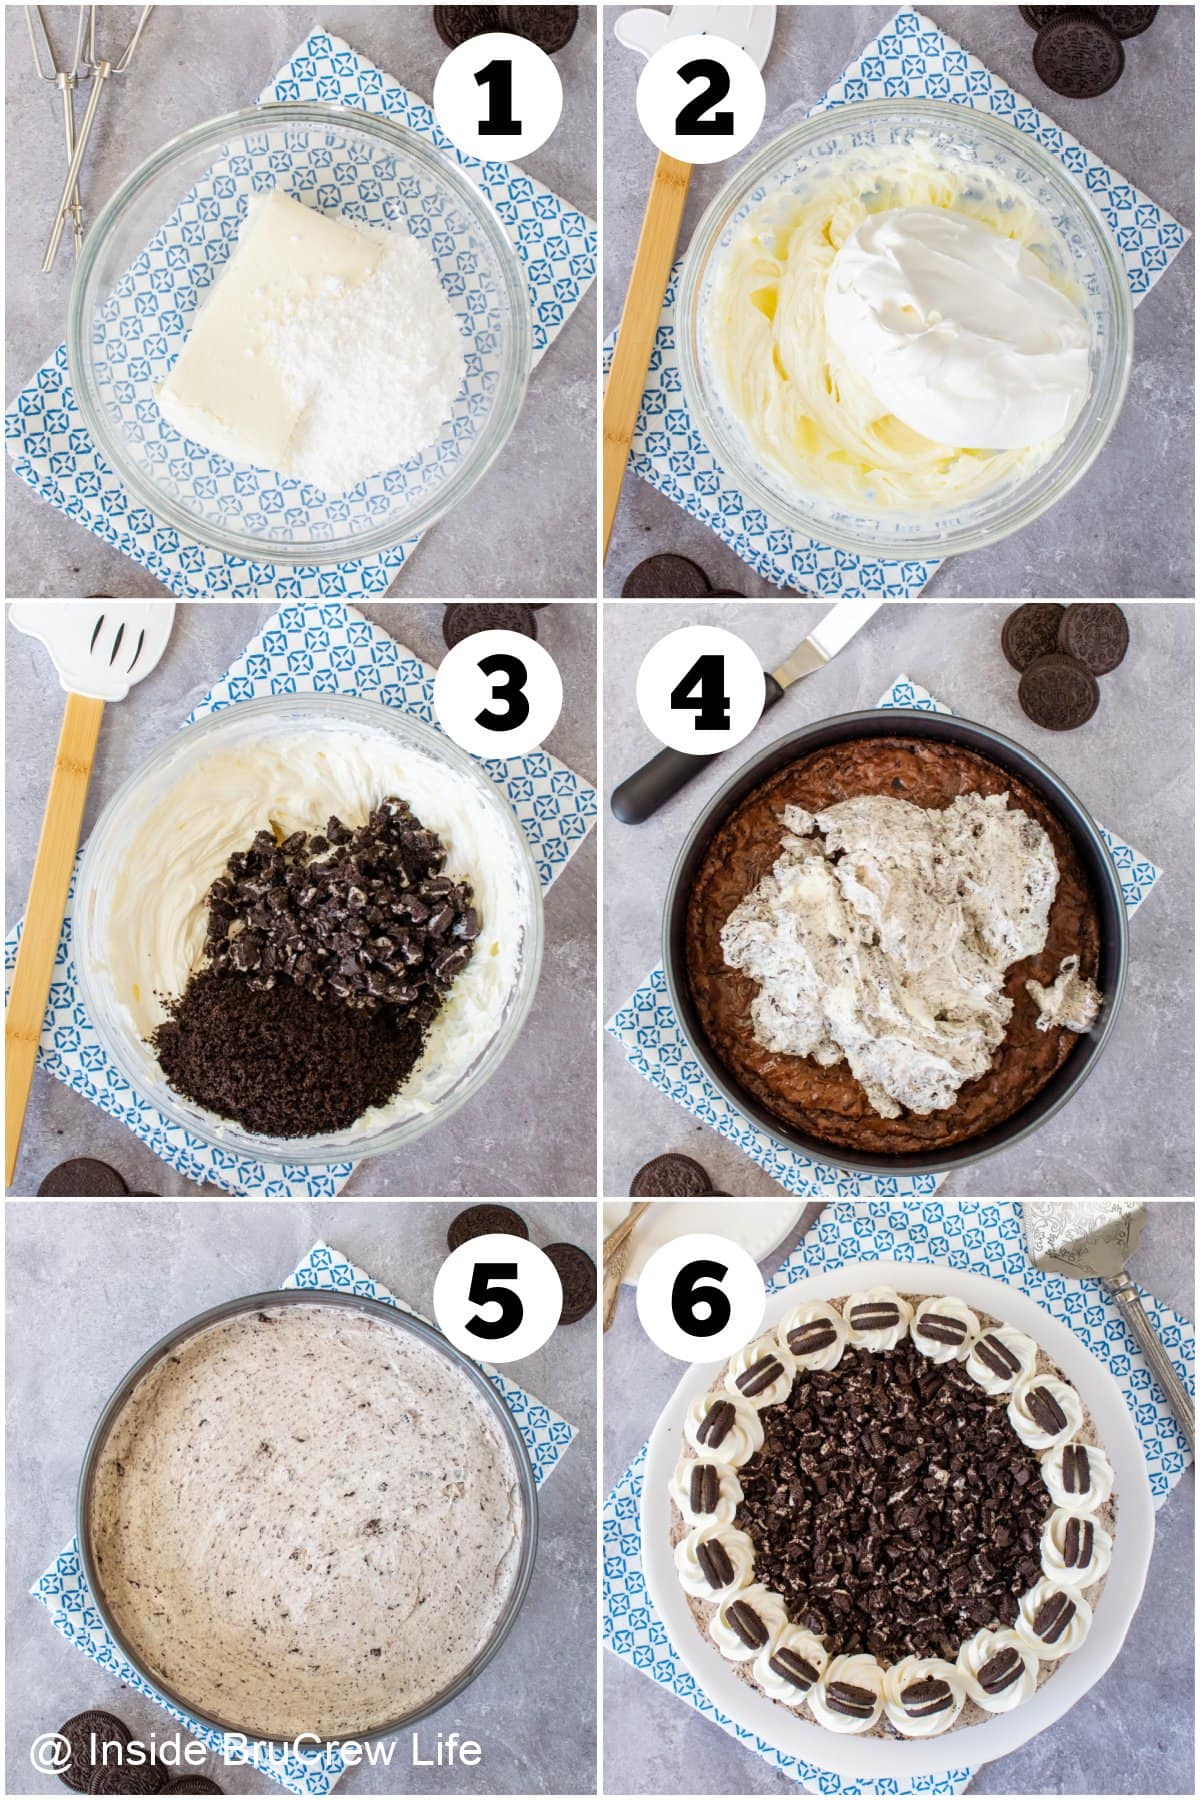 Six pictures collaged together showing how to assemble an Oreo dessert cake.